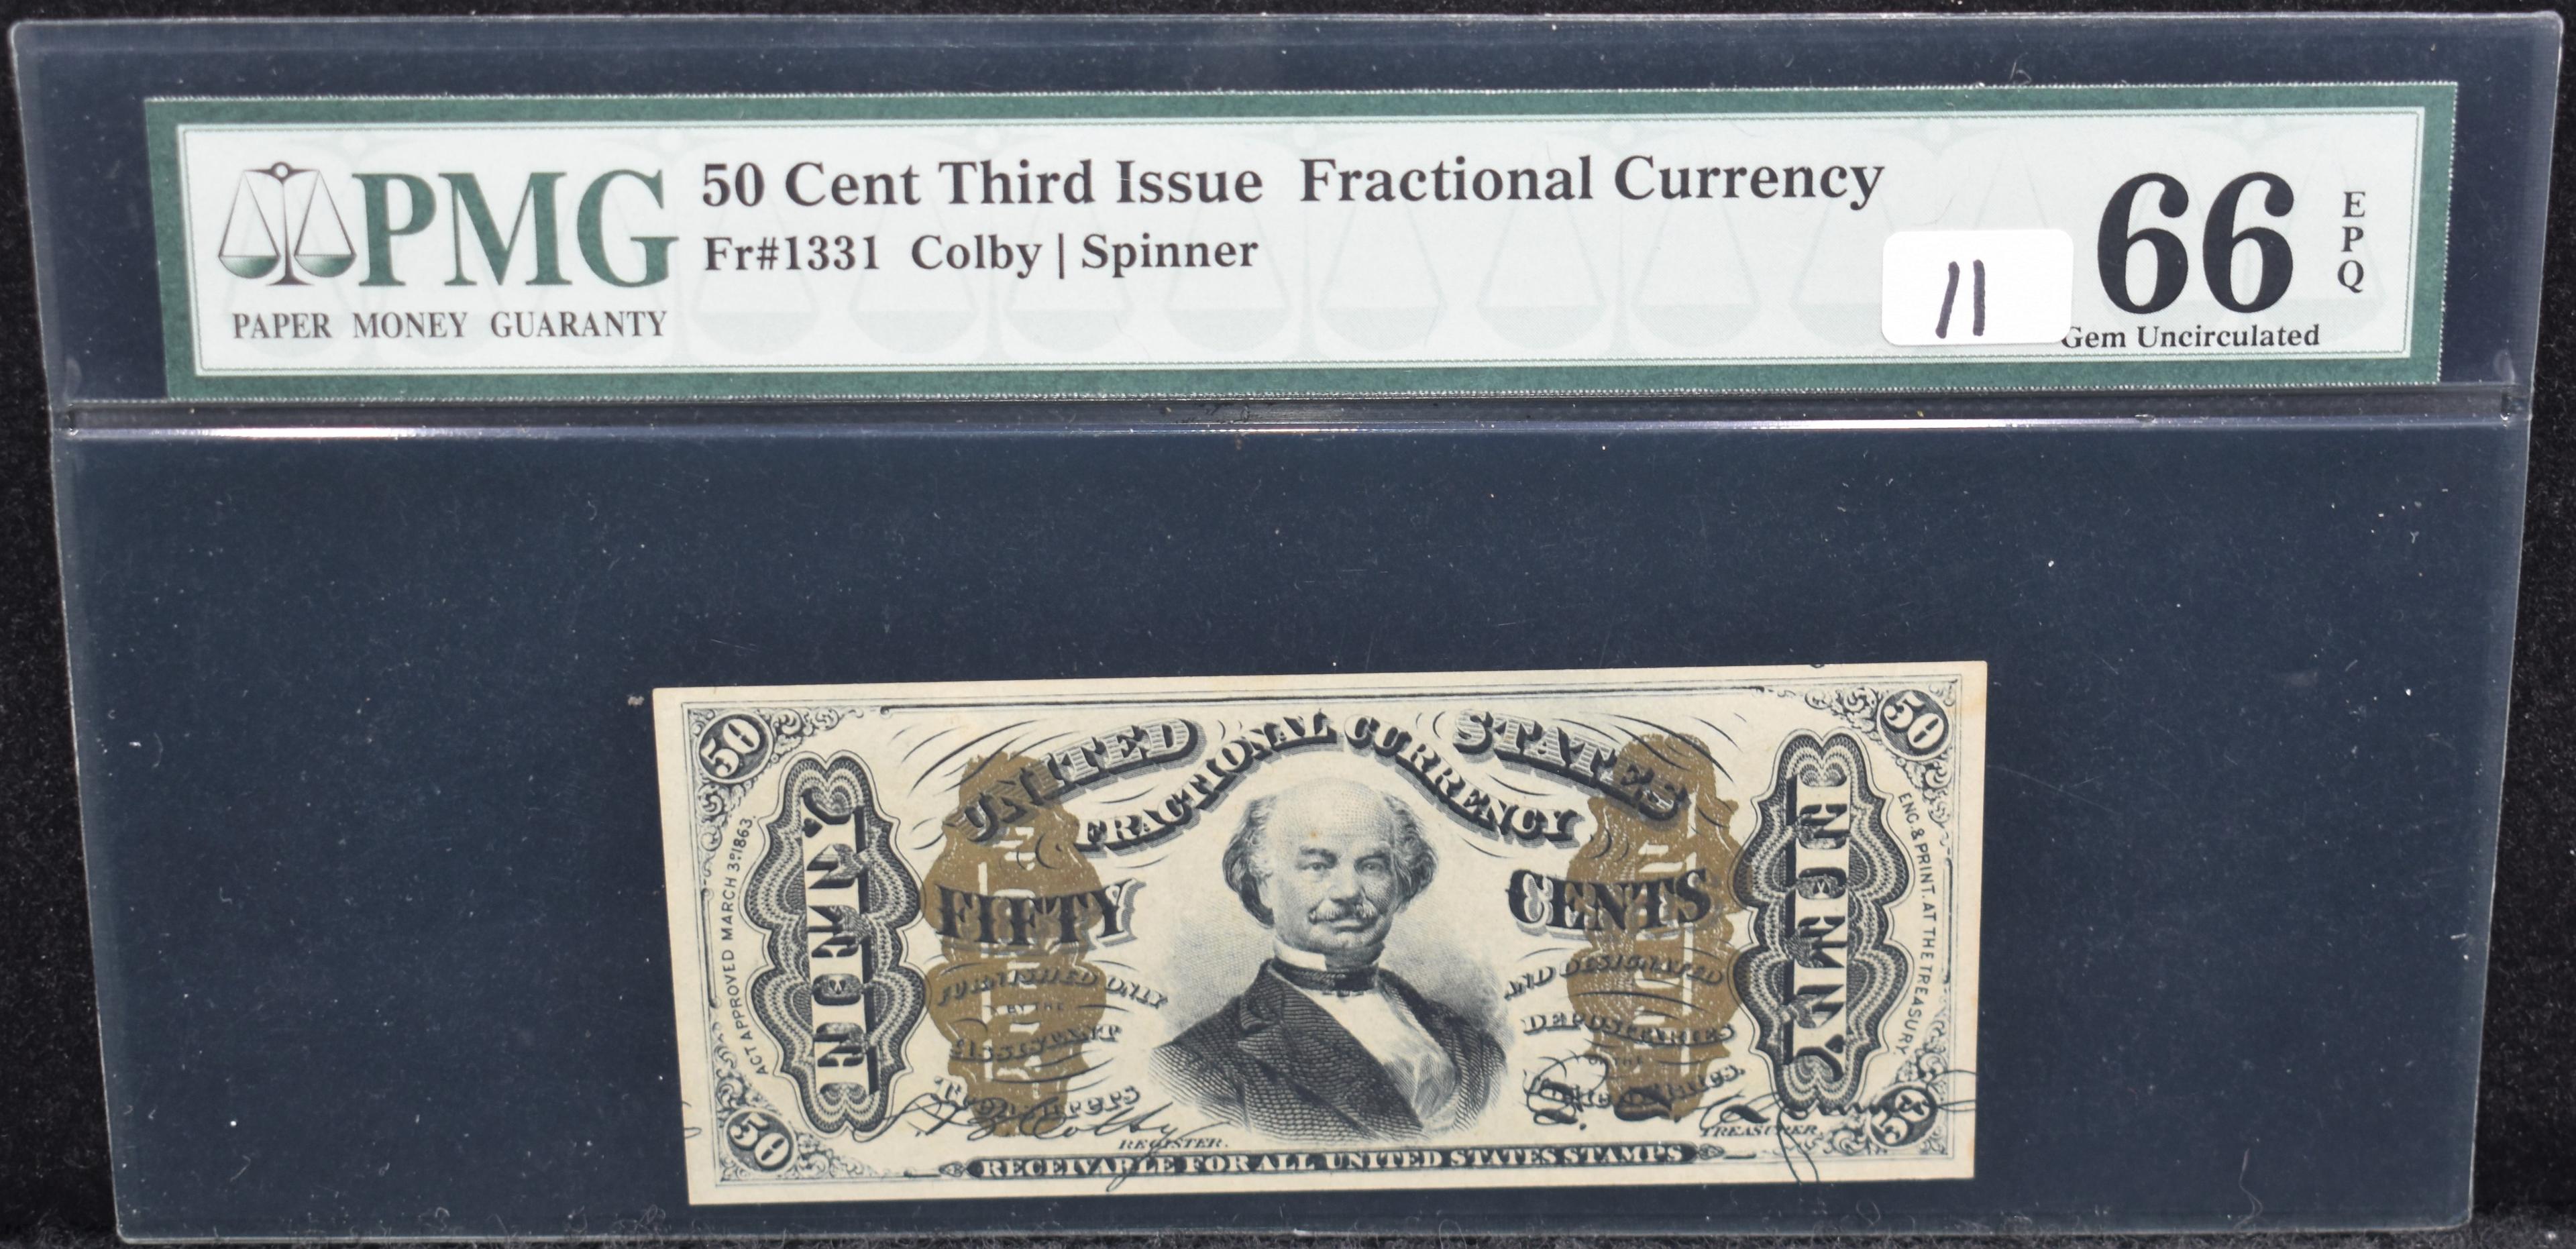 RARE 50 CENT 3RD ISSUE FRACTIONAL CURRENCY GU66